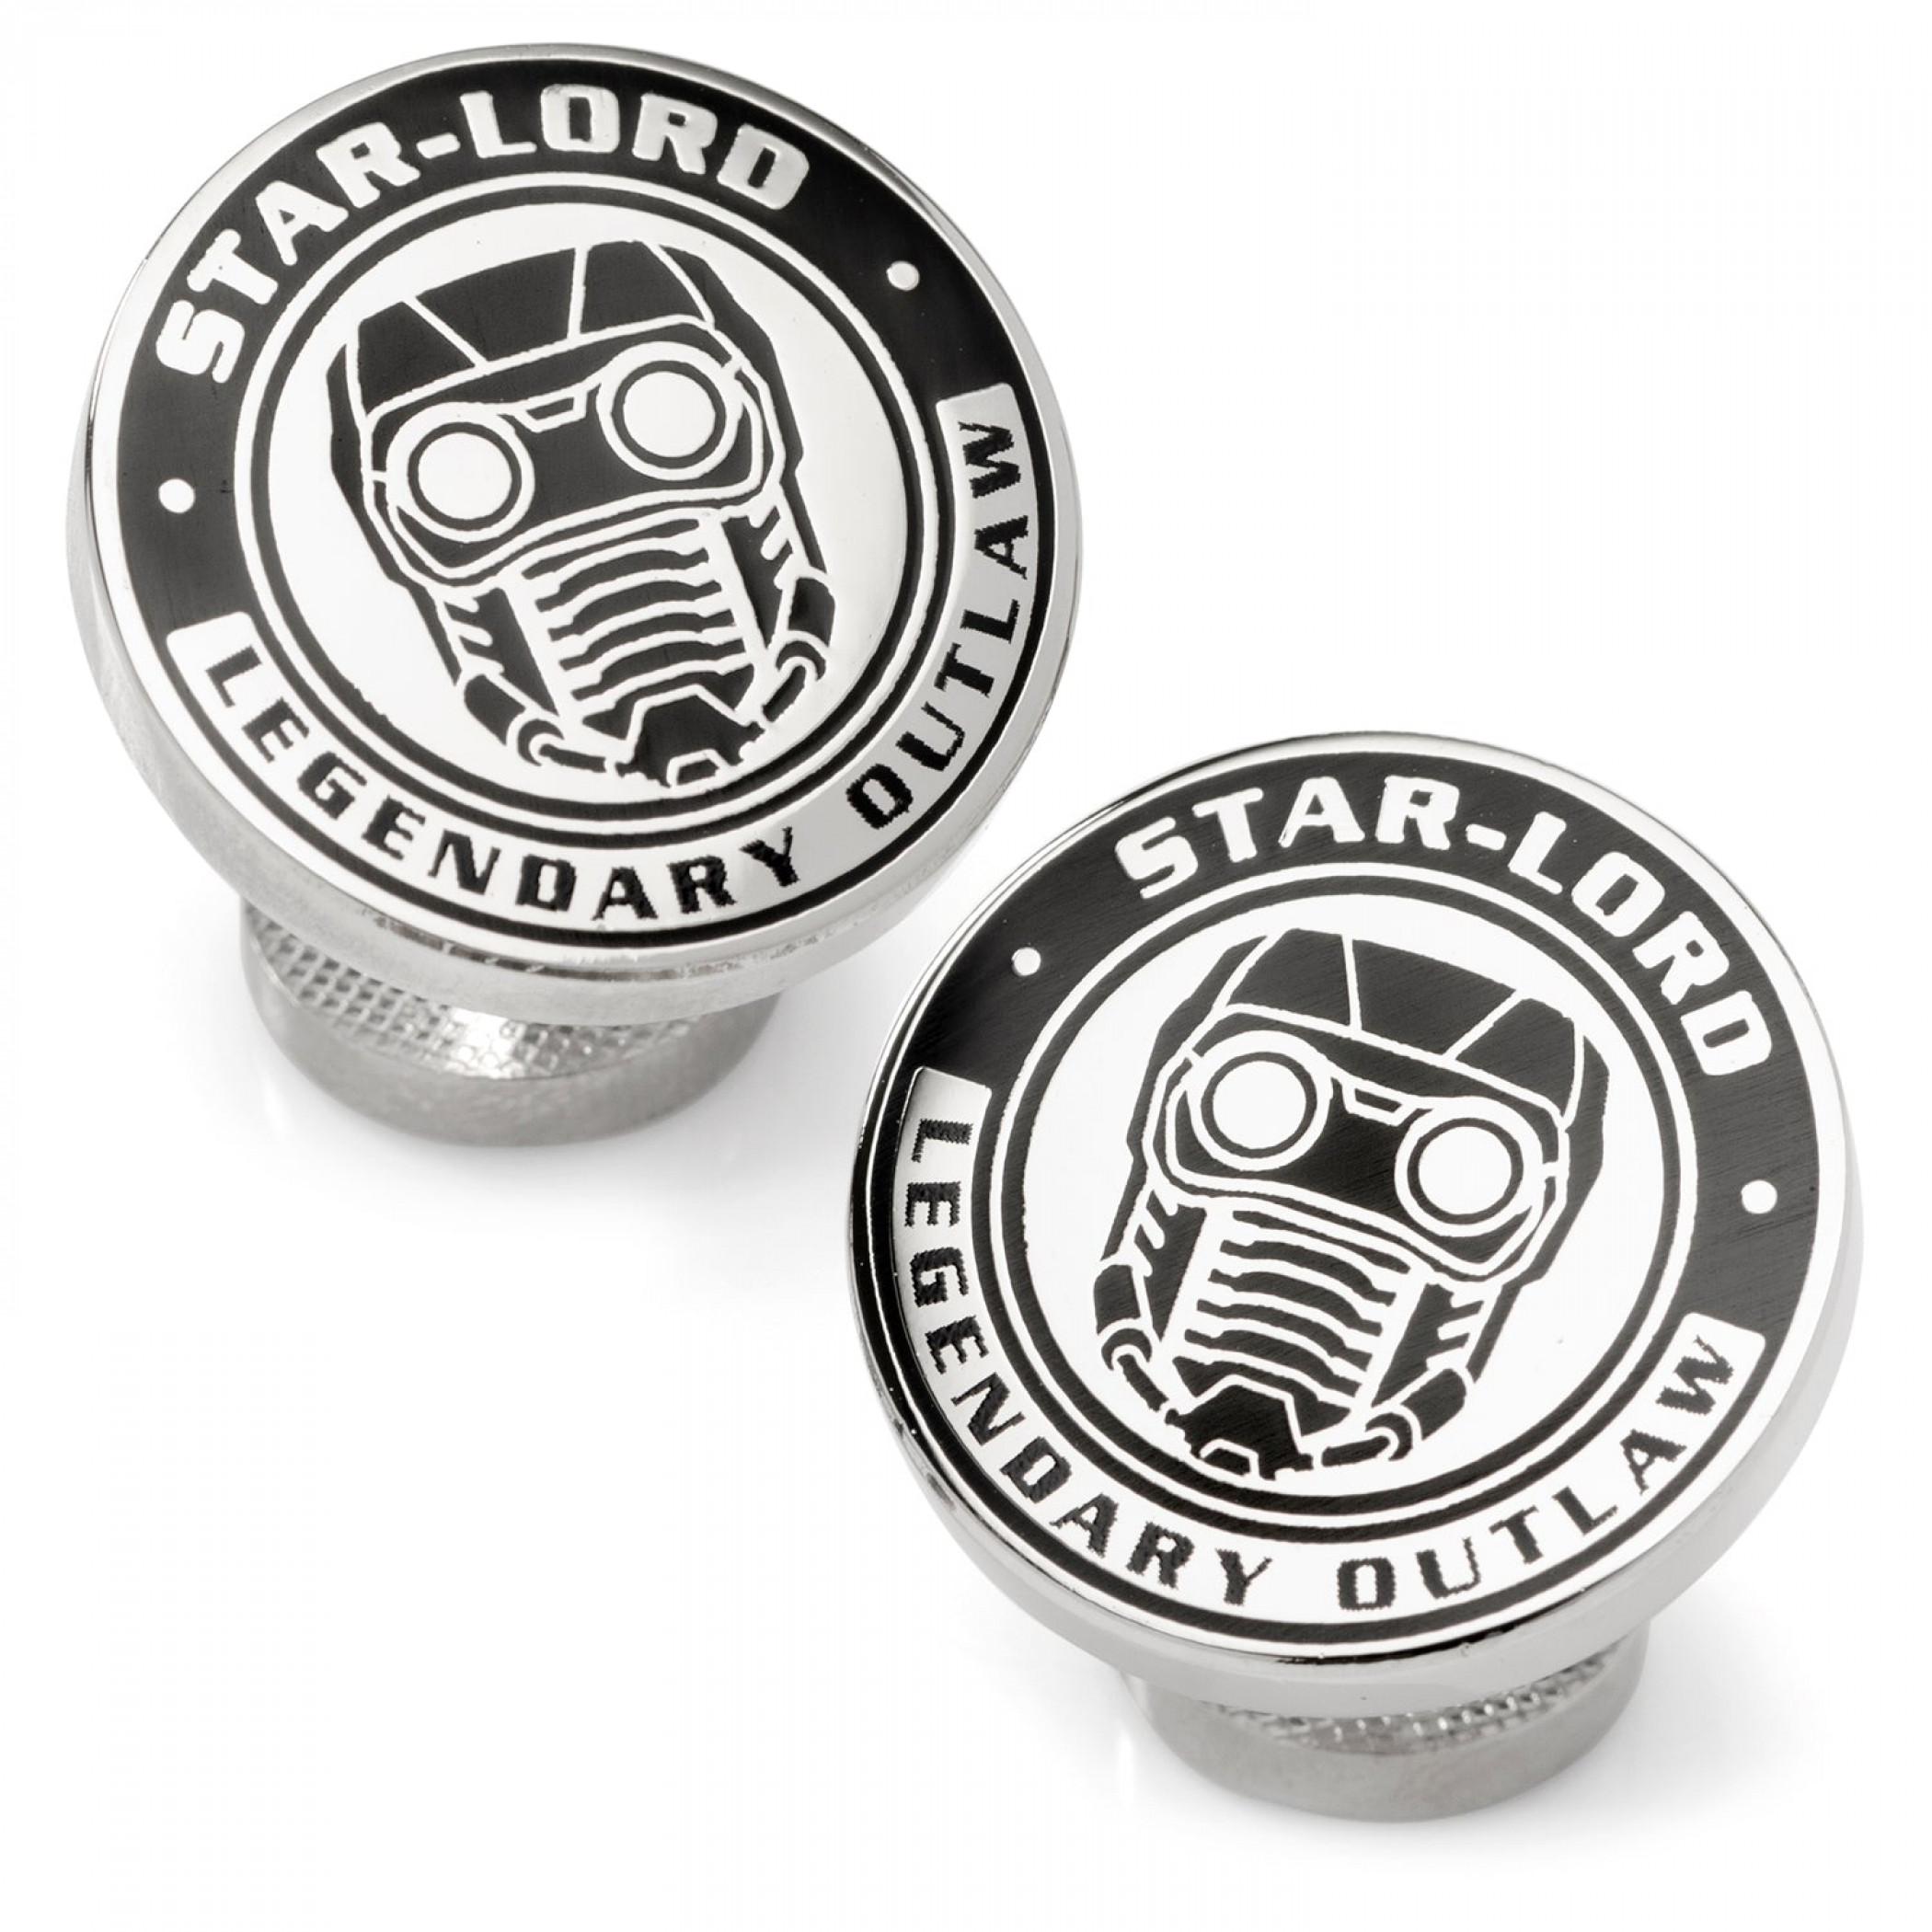 Guardians of The Galaxy Starlord Legendary Outlaw Cufflinks